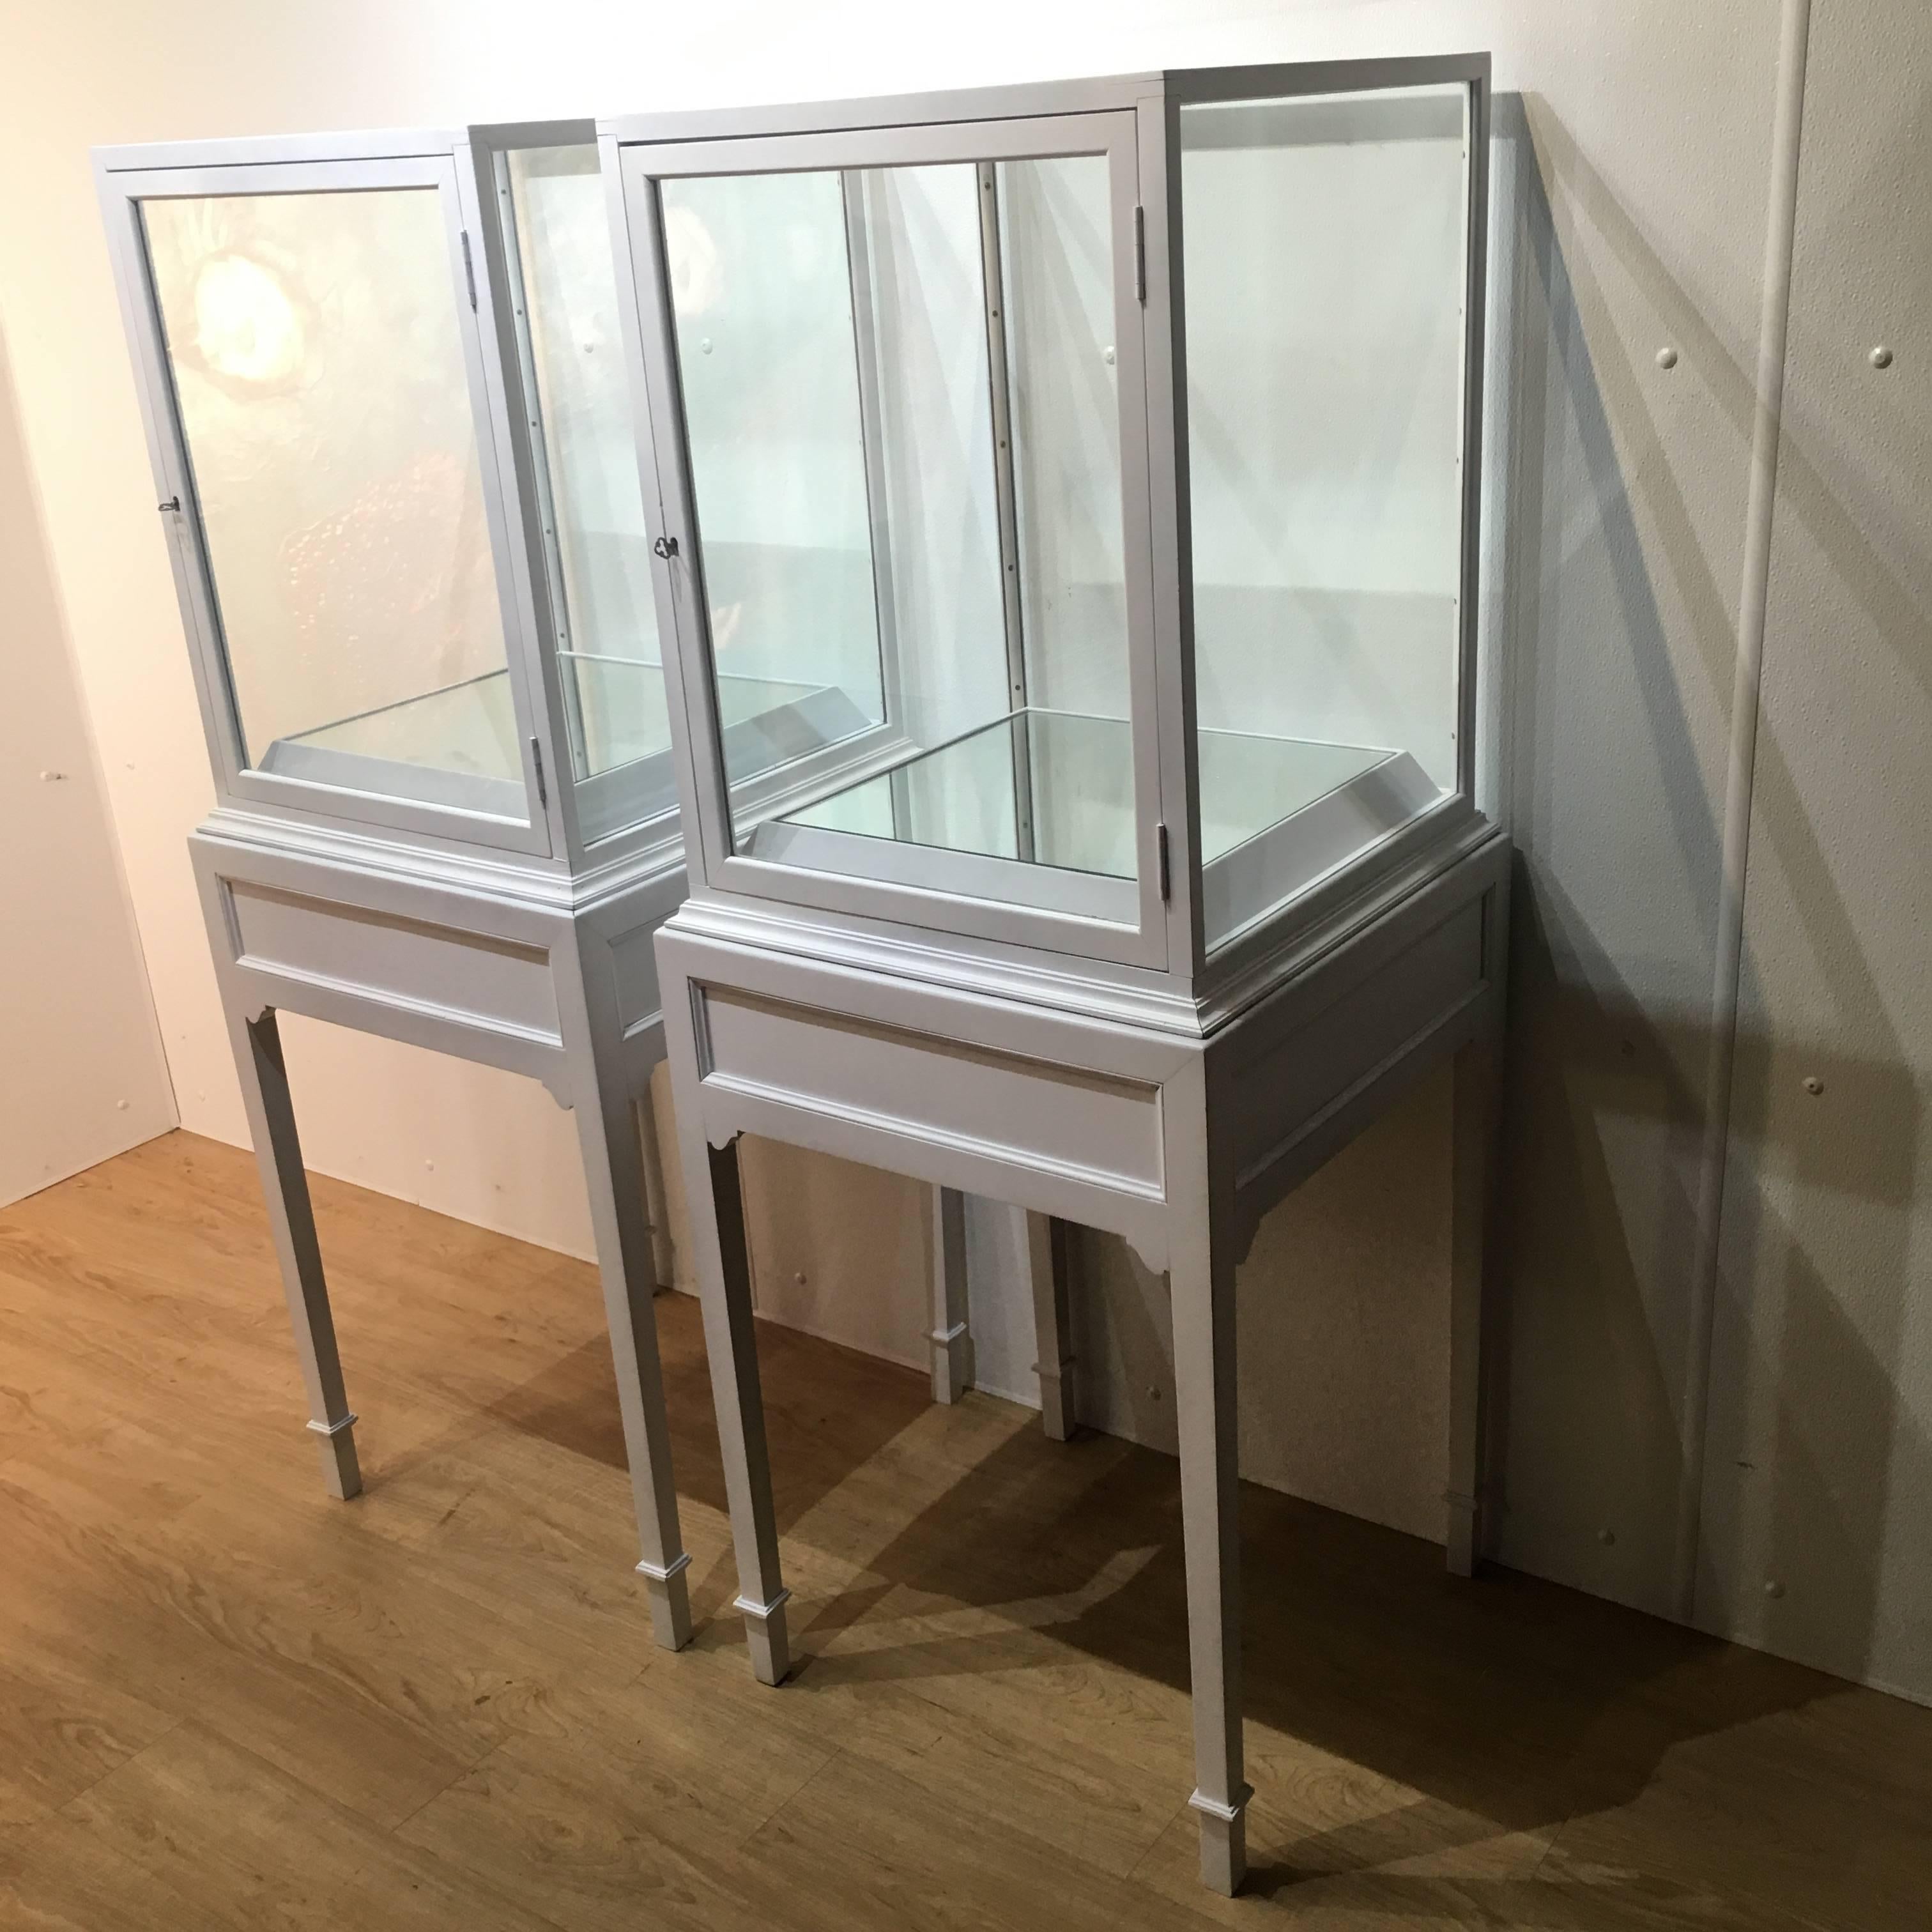 A pair of white lacquered display cabinets. Each one fitted with all around glazed panels, one as a door. The interior has 3" high mirrored plinth/pedestal. Raised on four tapering legs. Complete with working locks and keys. Two piece